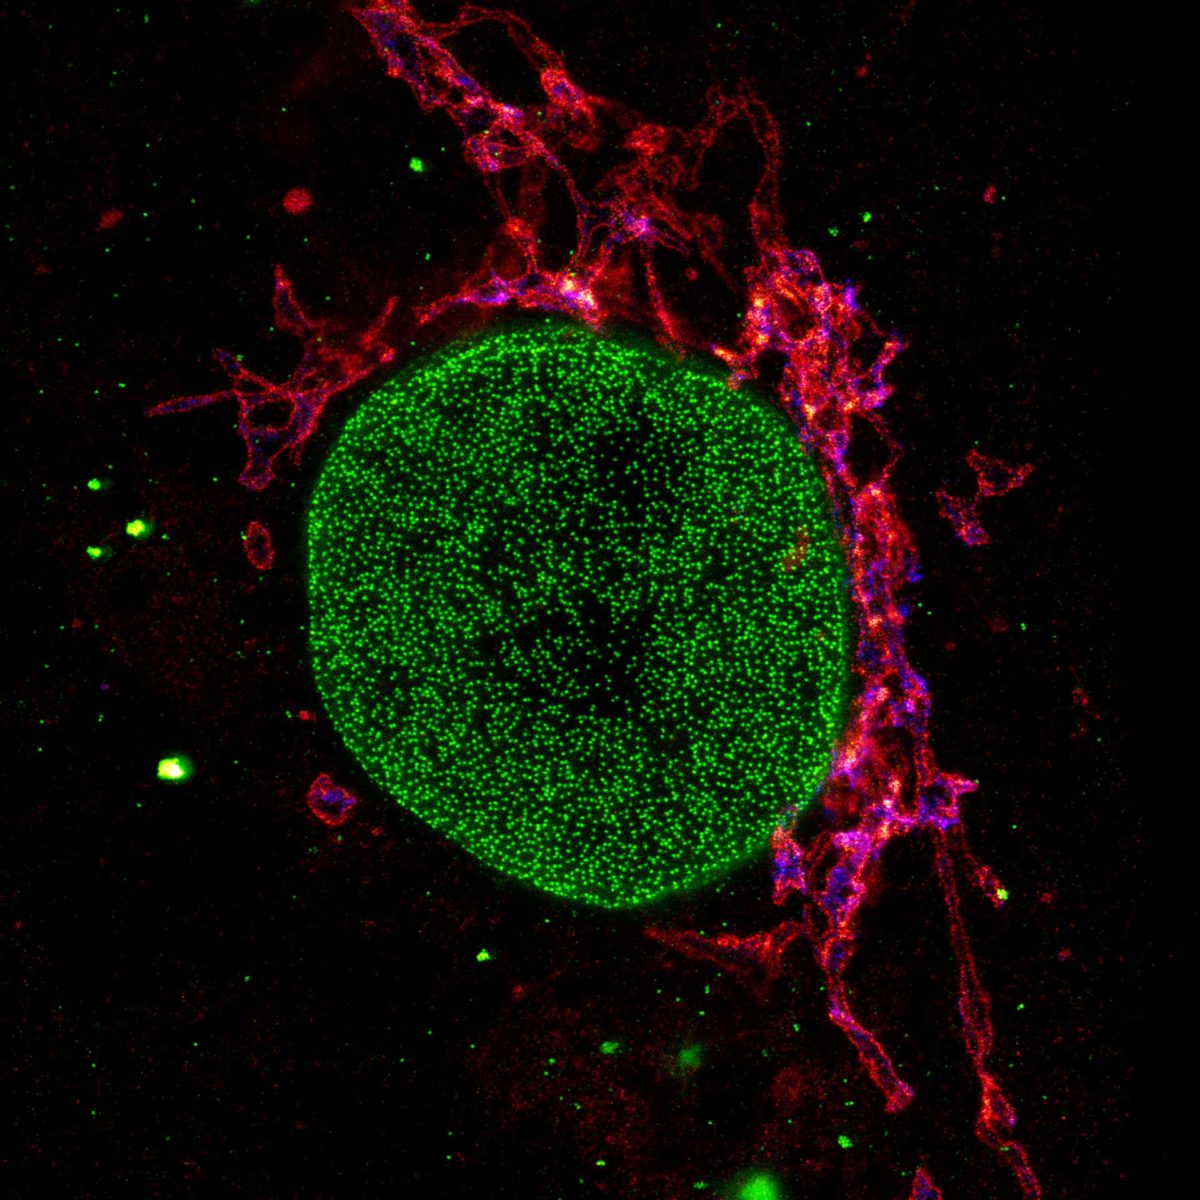 Three color STED and confocal image of a mammalian cultured cell.